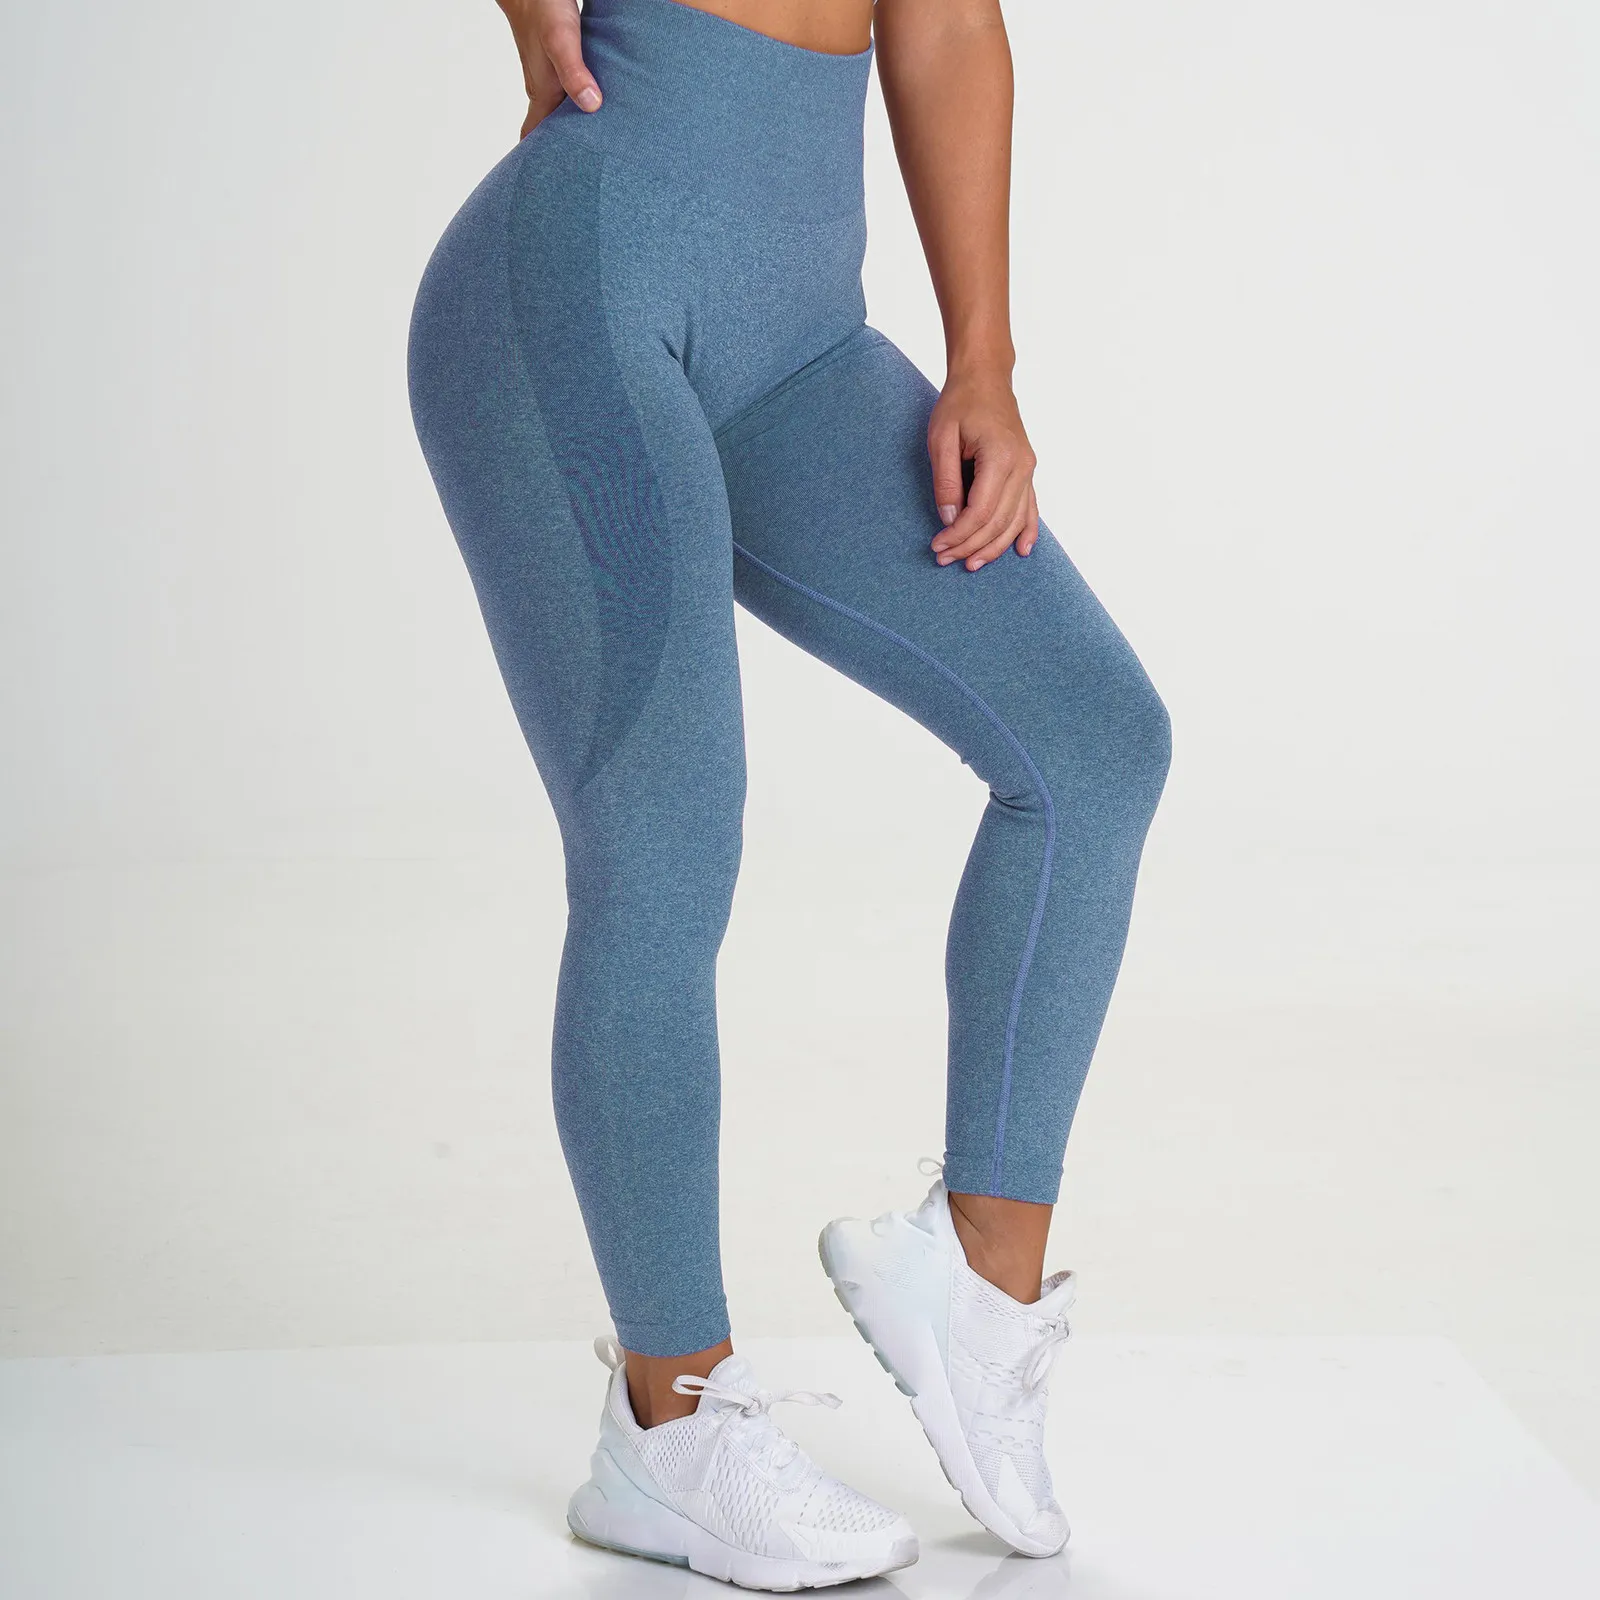 High Waist Seamless Push Up Seamless Workout Leggings For Women Energy  Boosting Fitness Pants For Running, Yoga, Gym And Sports Elastic Trousers  For Girls Tight And Comfortable Gym Clothes Style #2491703 From